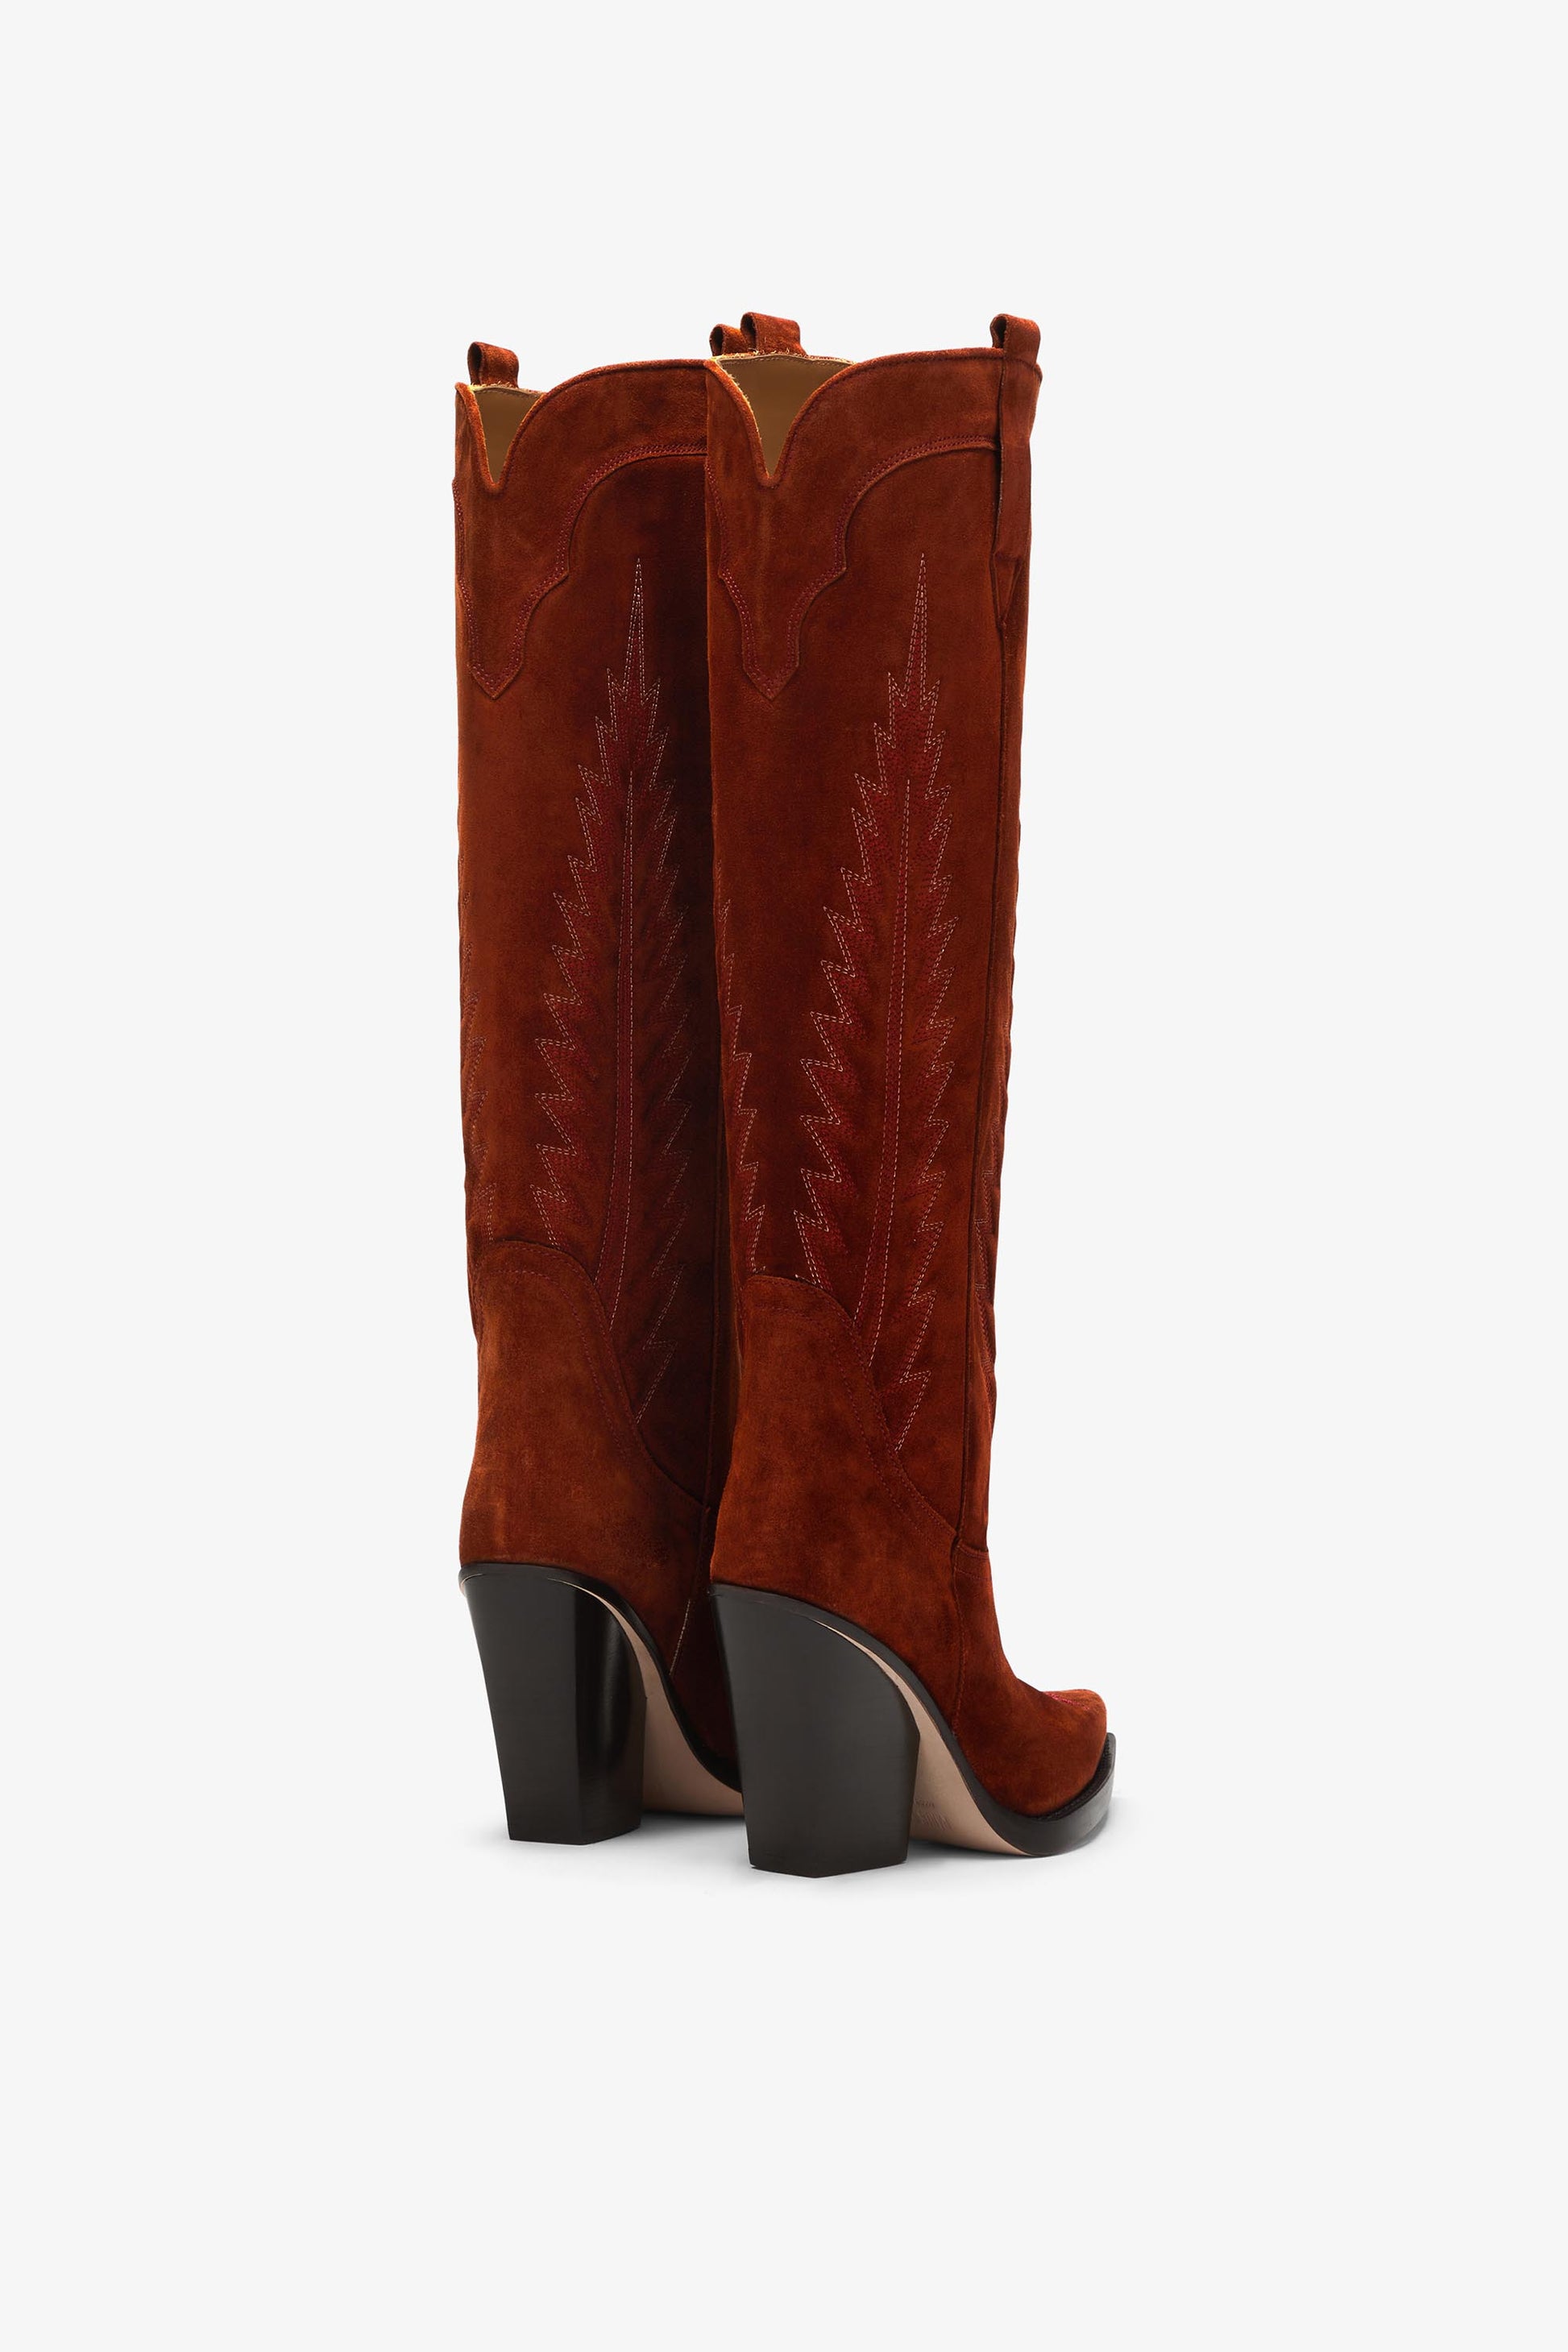 Rust suede embroidered Texan boot